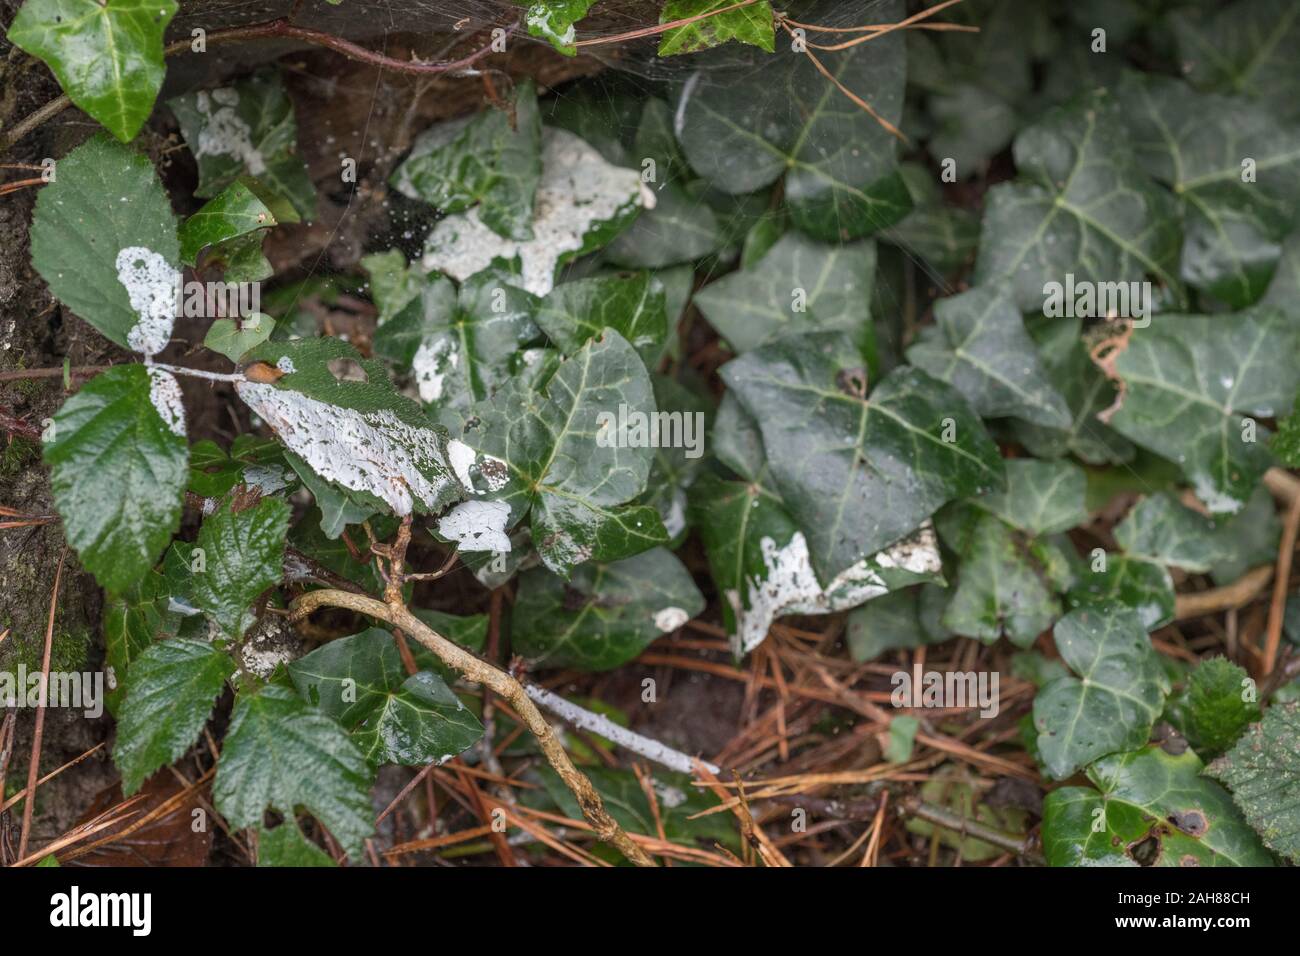 Pine resin sap drips from storm damaged Monterey Pine / Pinus radiata on ivy leaves. White resin sap is flammable & used for lighting emergency fires Stock Photo